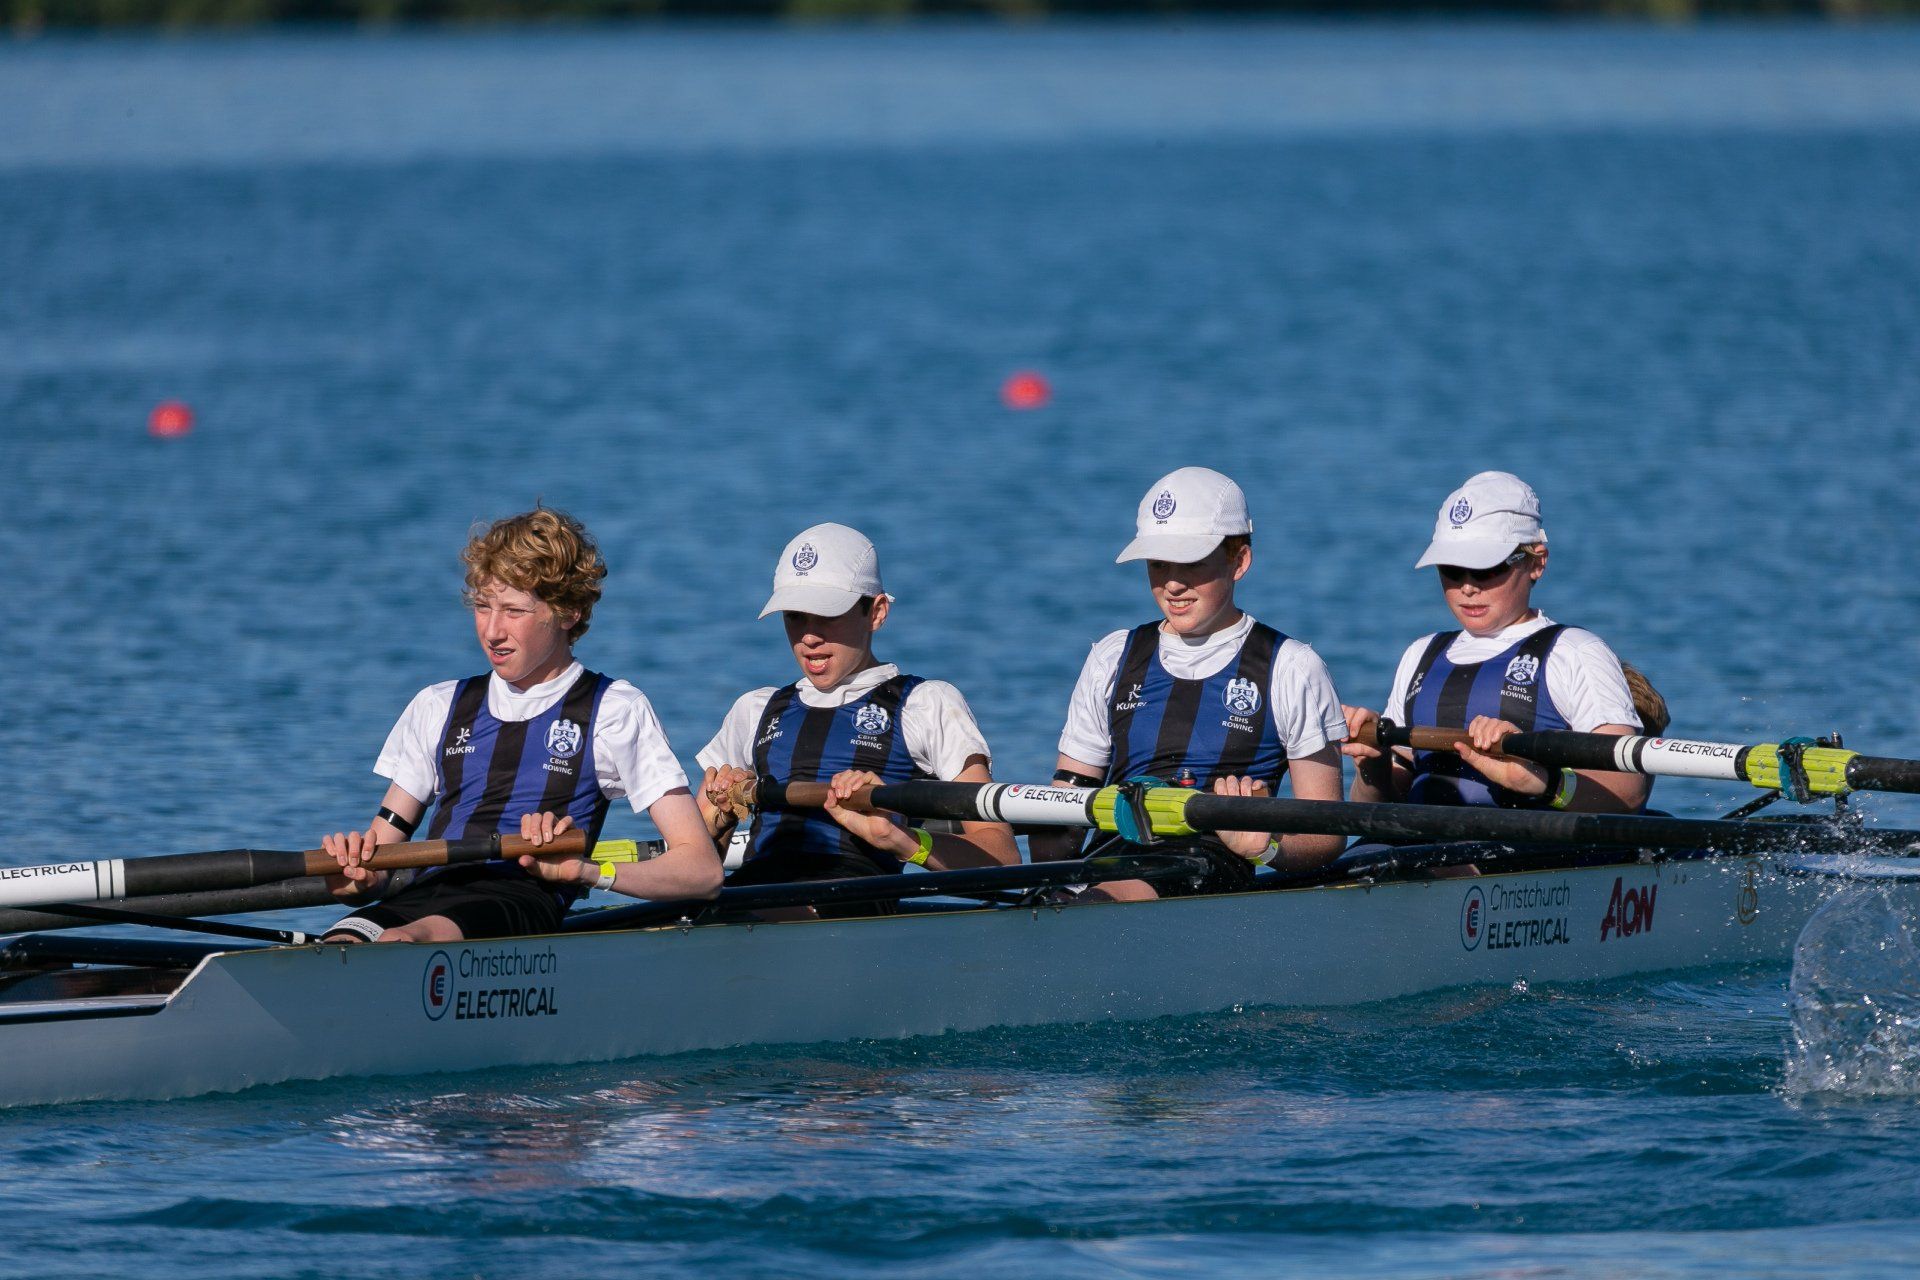 CBHS Rowing Team in Row Boat - Chch Electrical Sponsorship On Boat